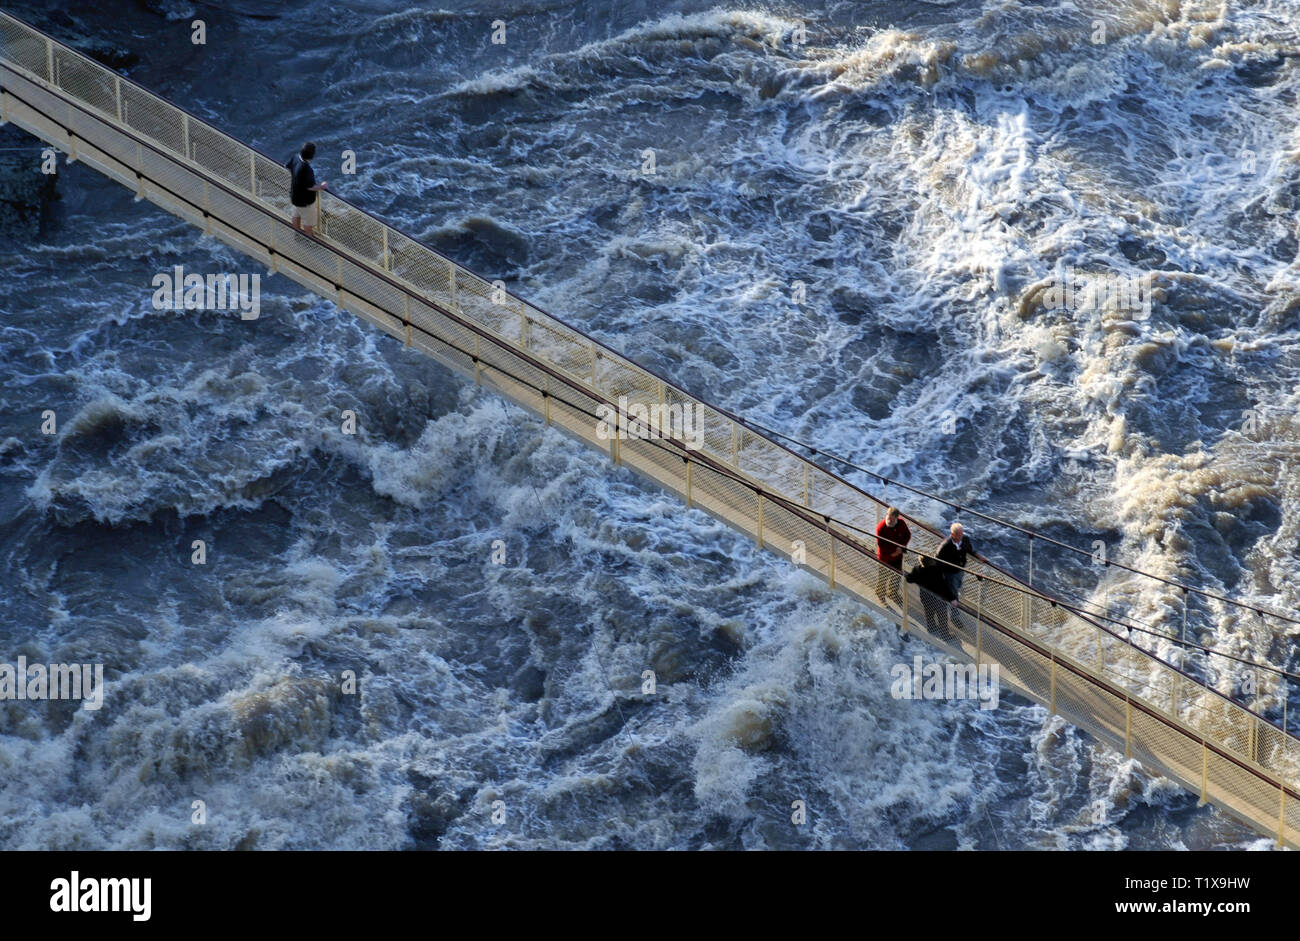 An elevated view of three people on a suspension bridge looking down on the flooded Tamar river in Launceston, Tasmania, Australia. Stock Photo